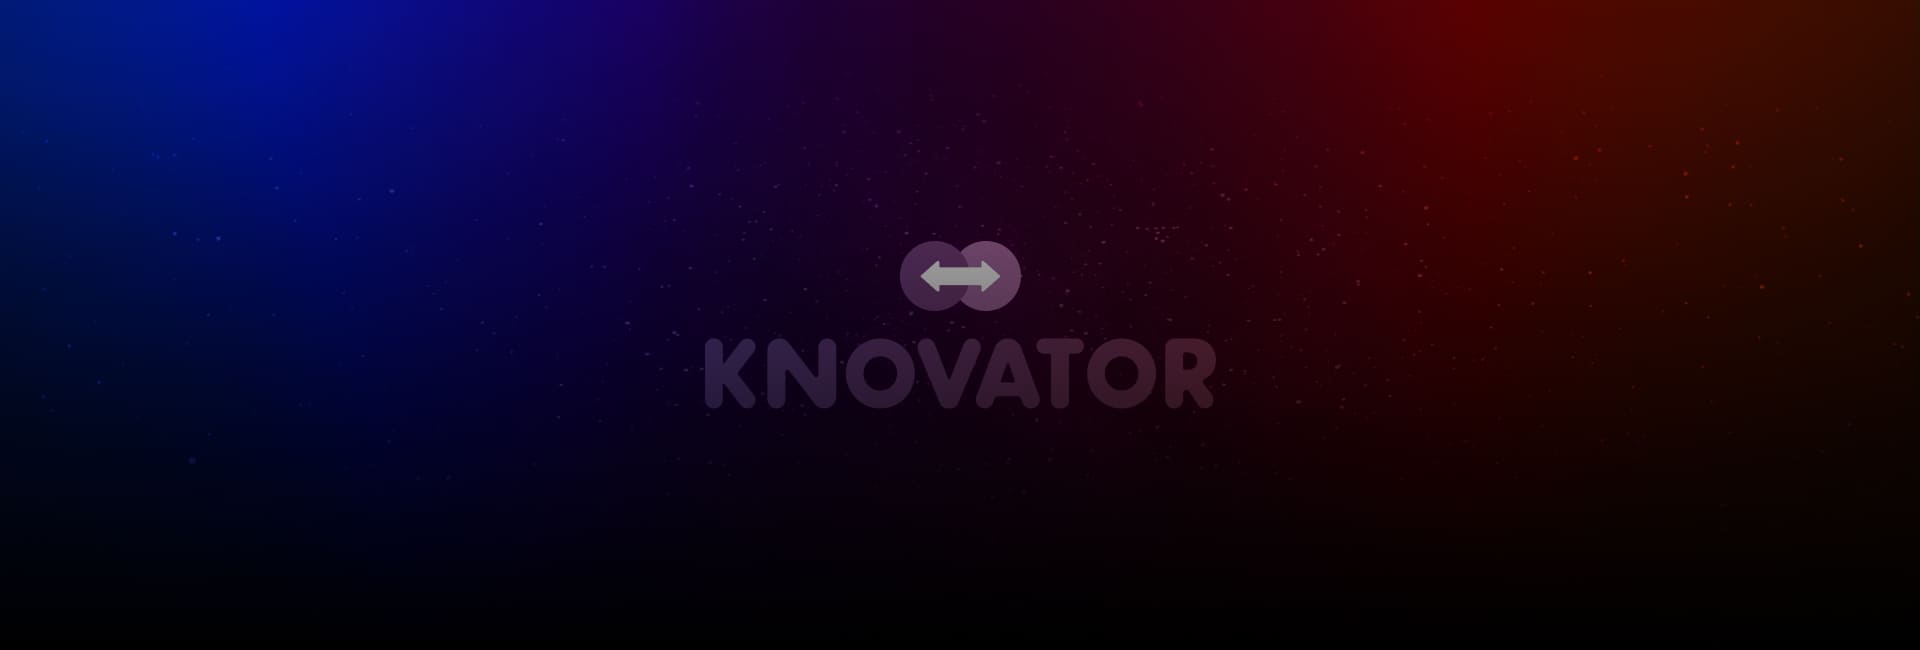 Turn To Knovator For The Best-In-Class Manual Testing